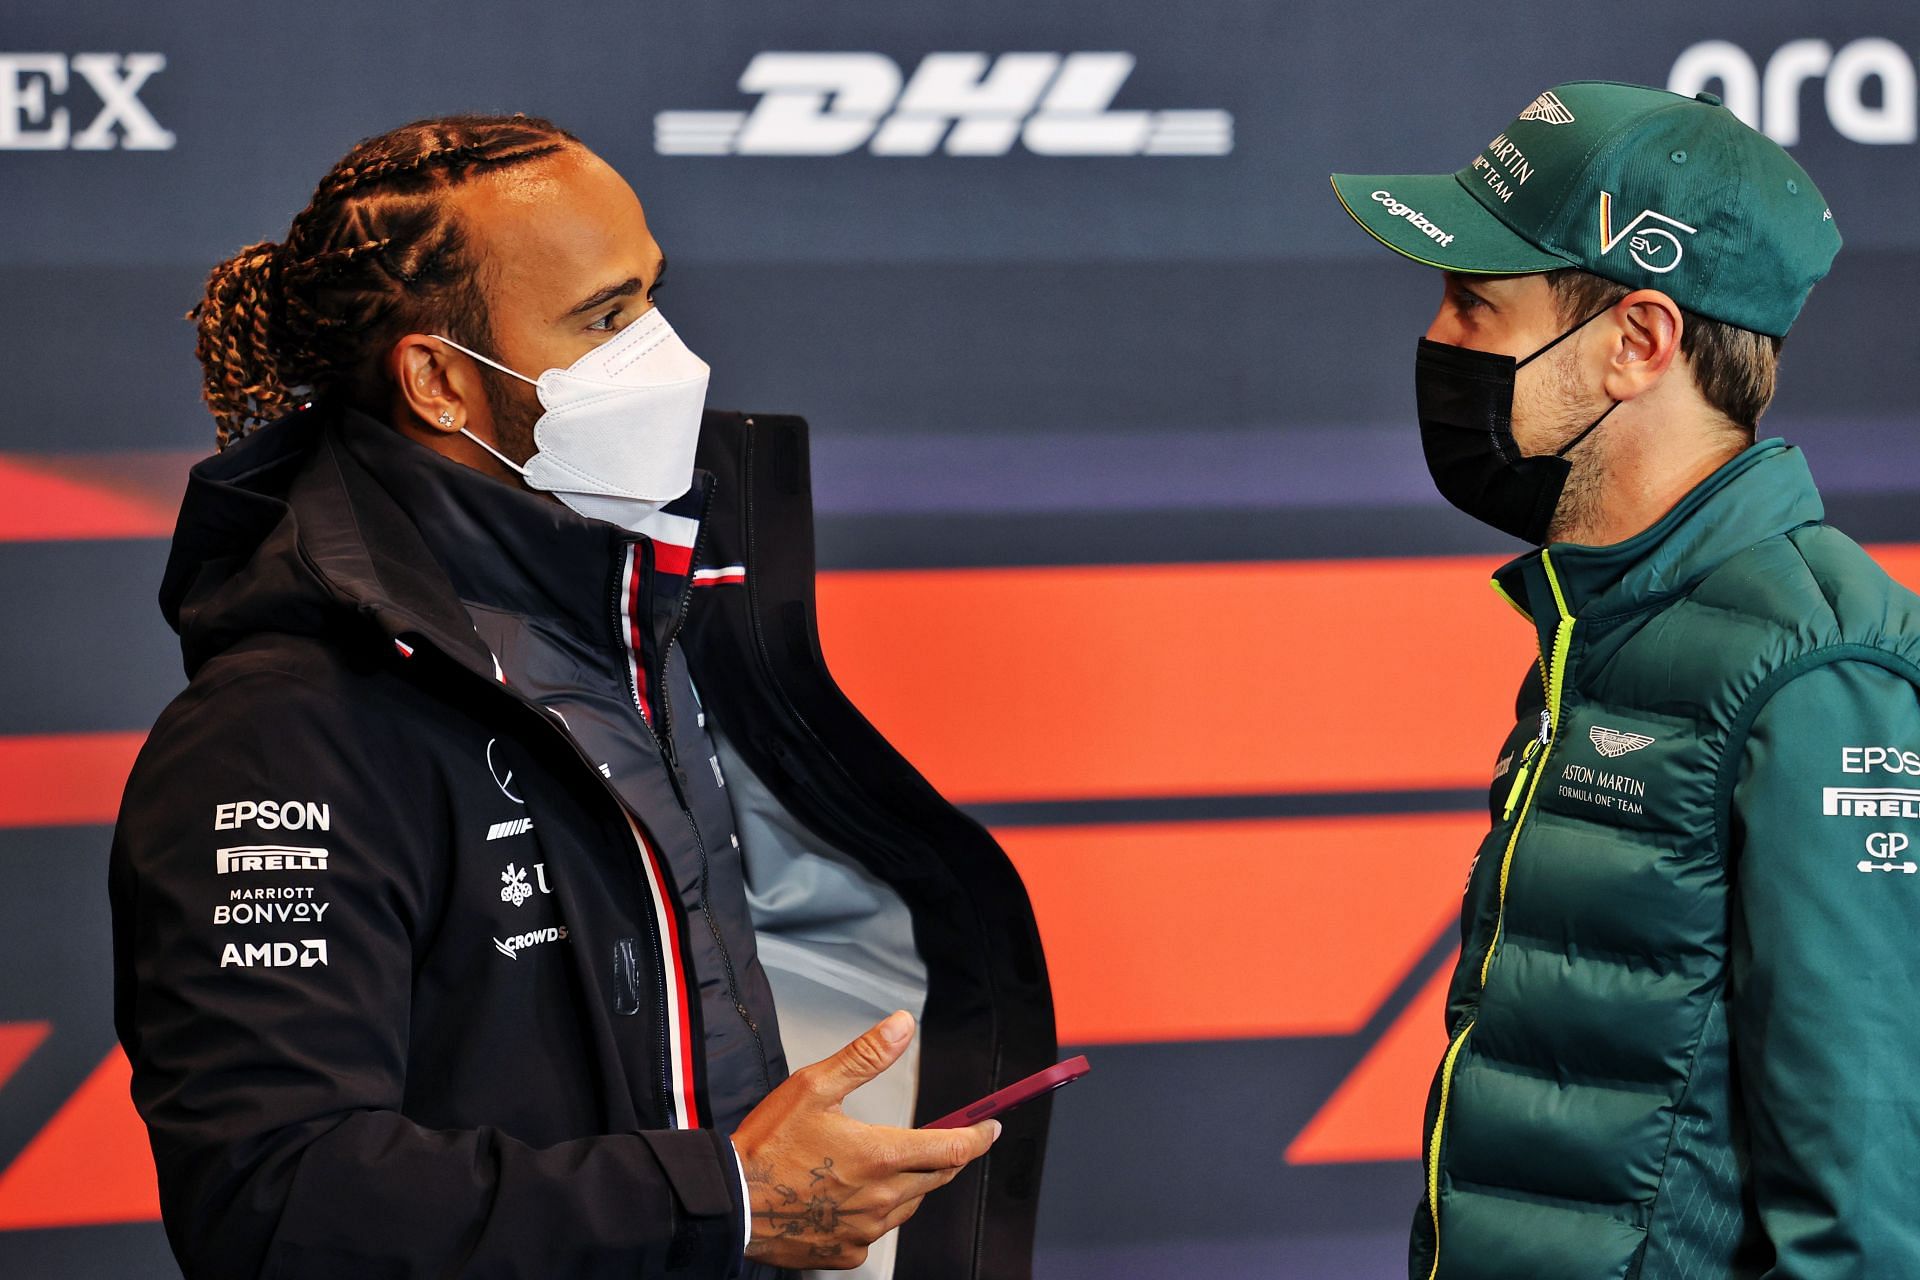 Lewis Hamilton (left) talks with Sebastian Vettel (right) ahead of the 2021 Imola Grand Prix (Photo by Laurent Charniaux - Pool/Getty Images)